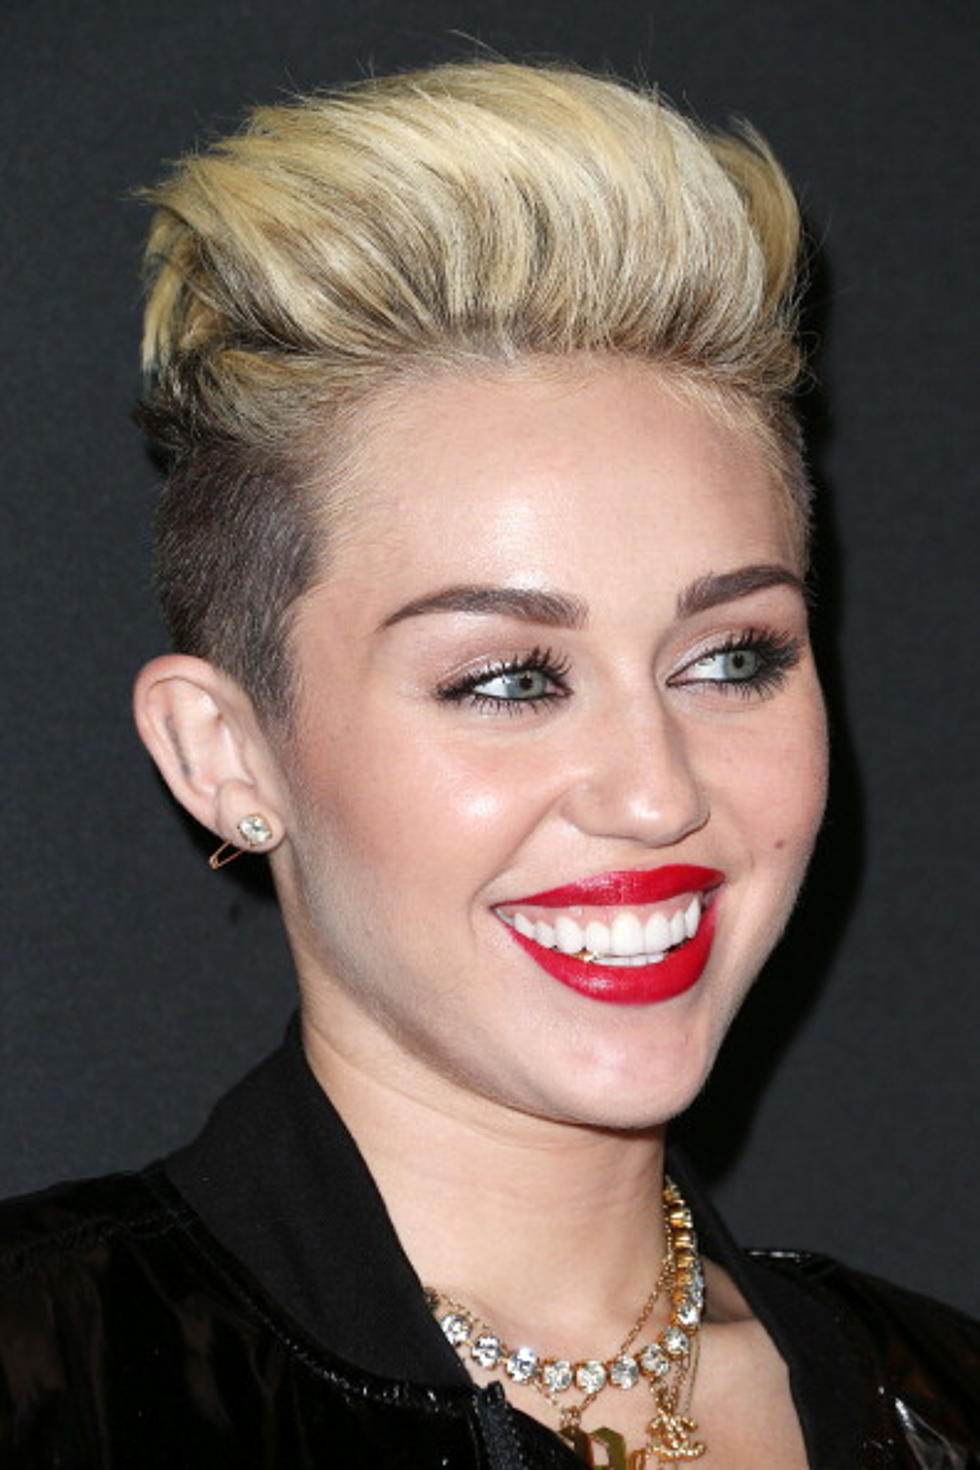 Miley Cyrus Shows off Gold Tooth Bling at MySpace Event